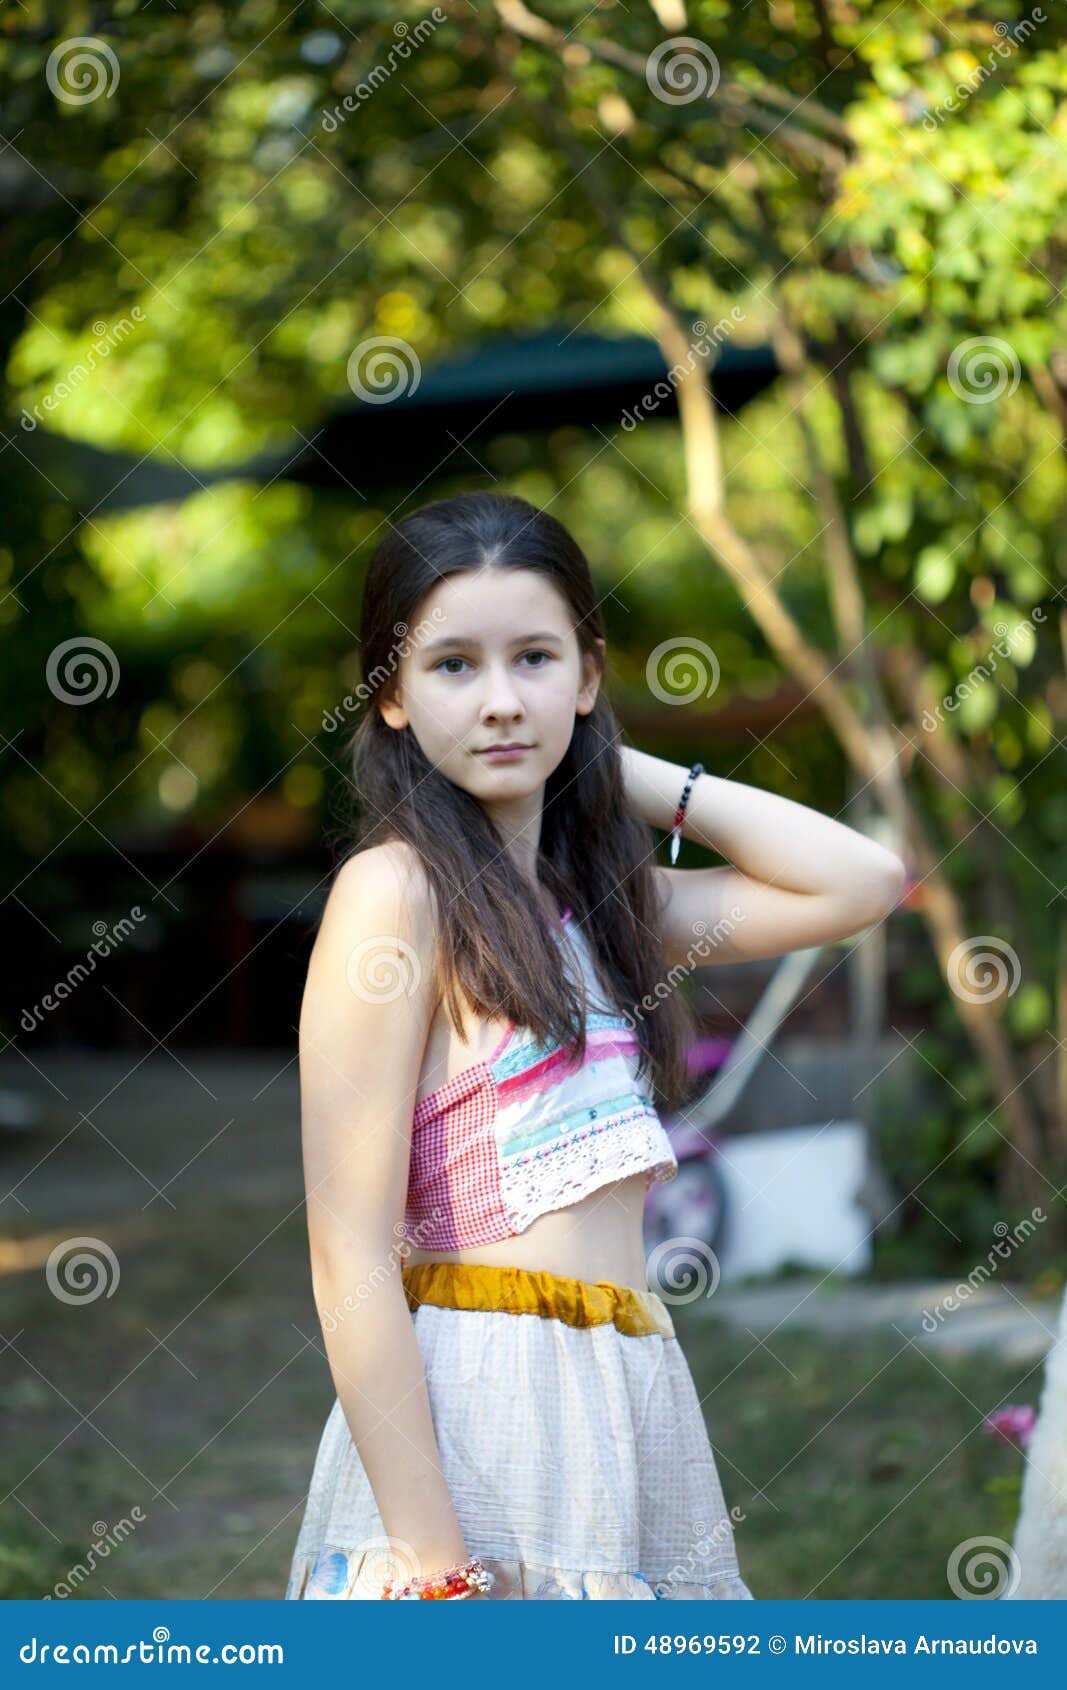 Teenage girl in boho style stock photo. Image of country - 48969592